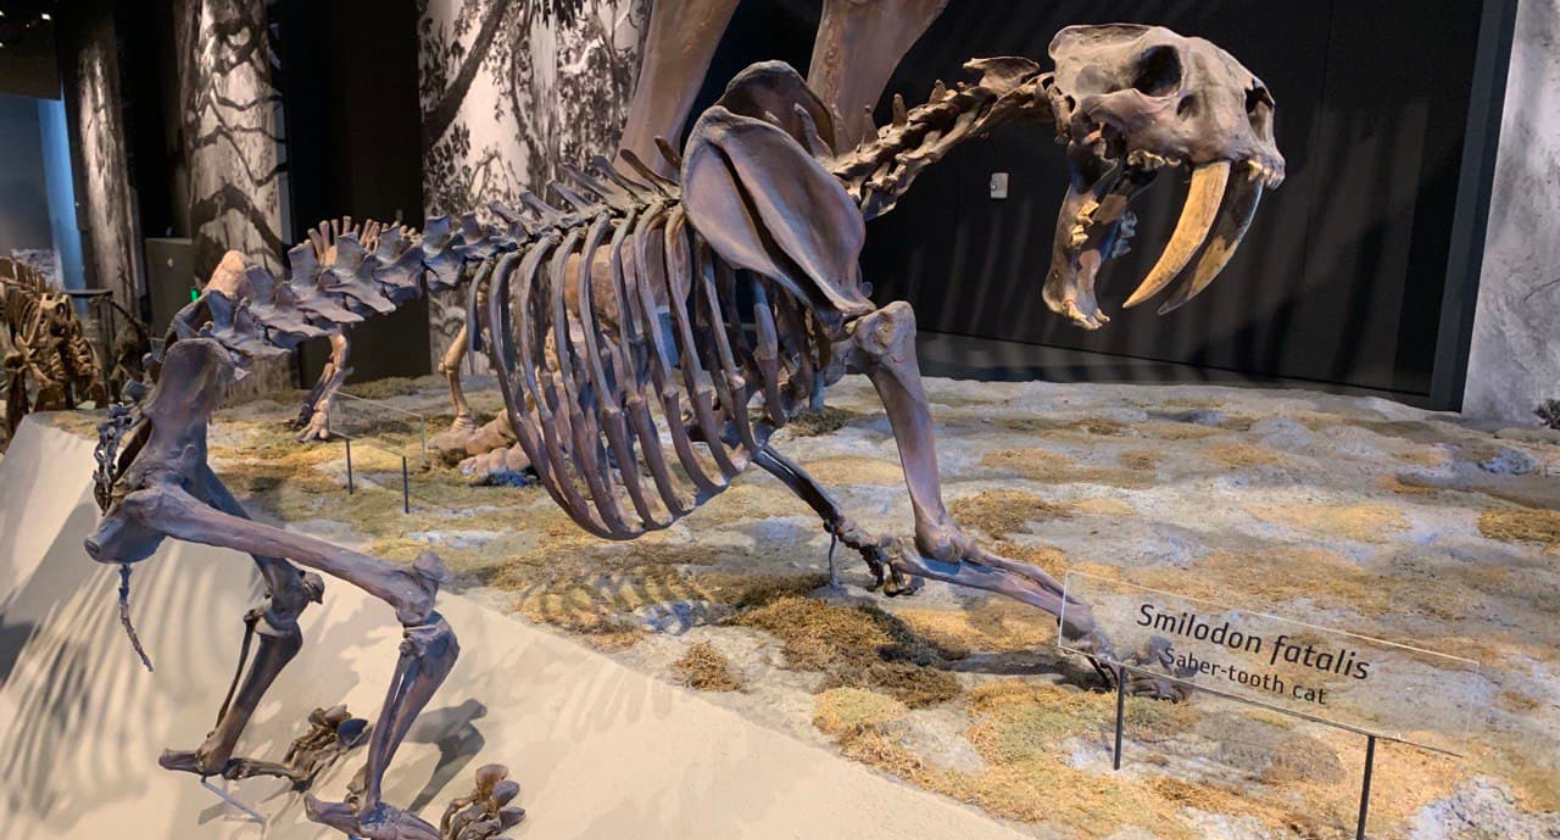 [image] Did a Disease Wipe Out America's Ice Age Beasts?